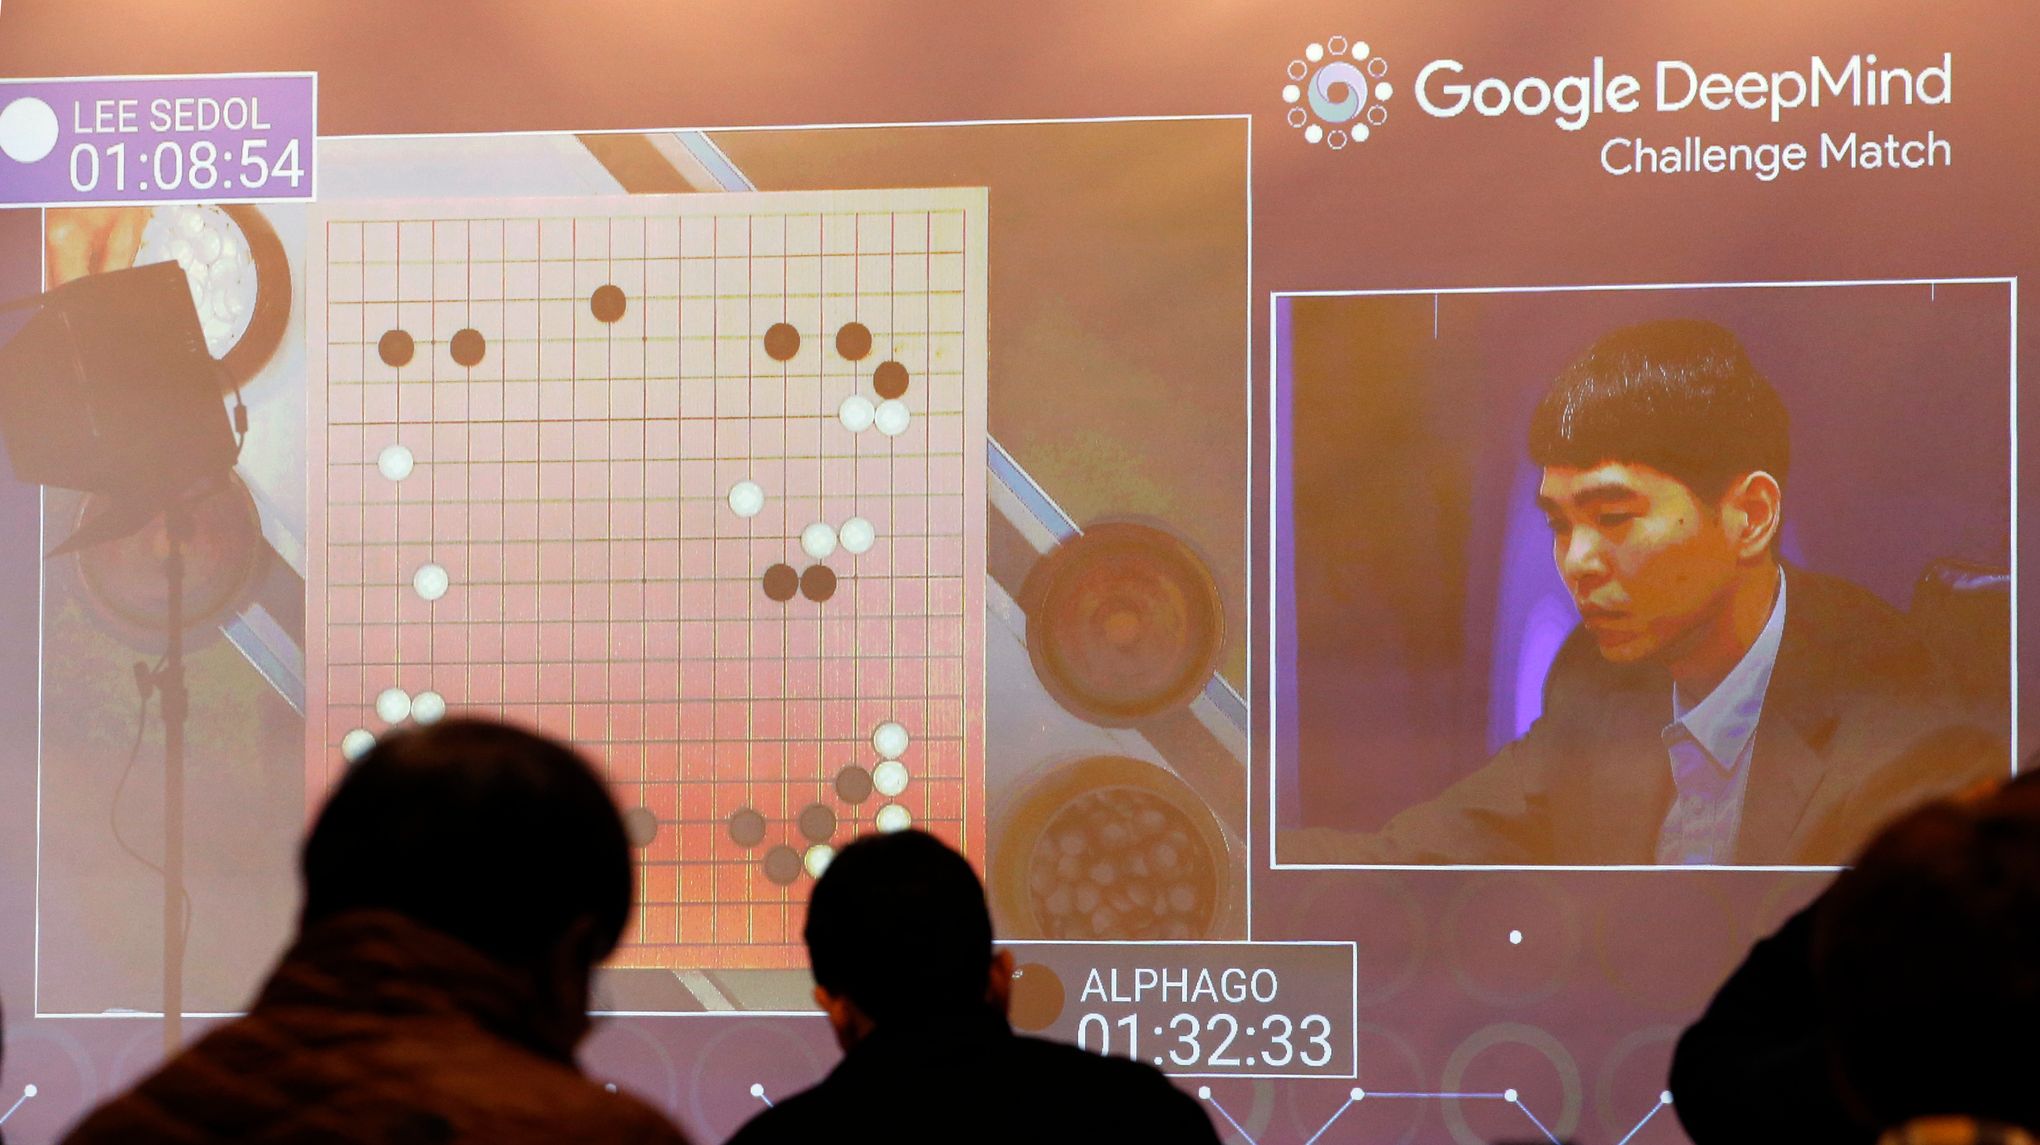 Google's New AI Is a Master of Games, but How Does It Compare to